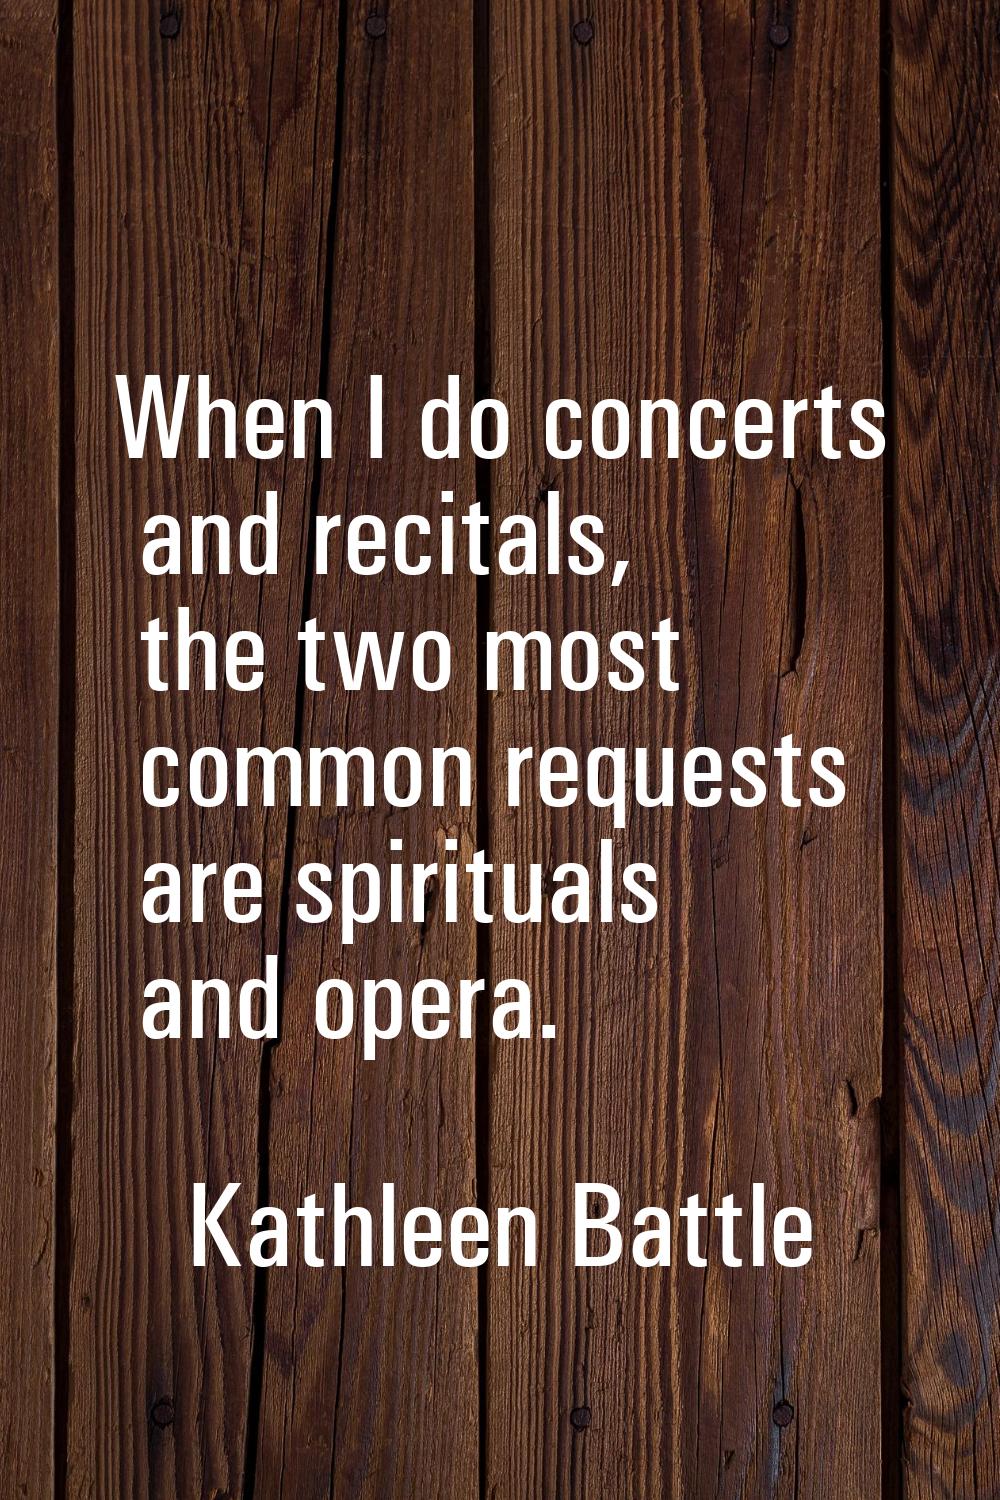 When I do concerts and recitals, the two most common requests are spirituals and opera.